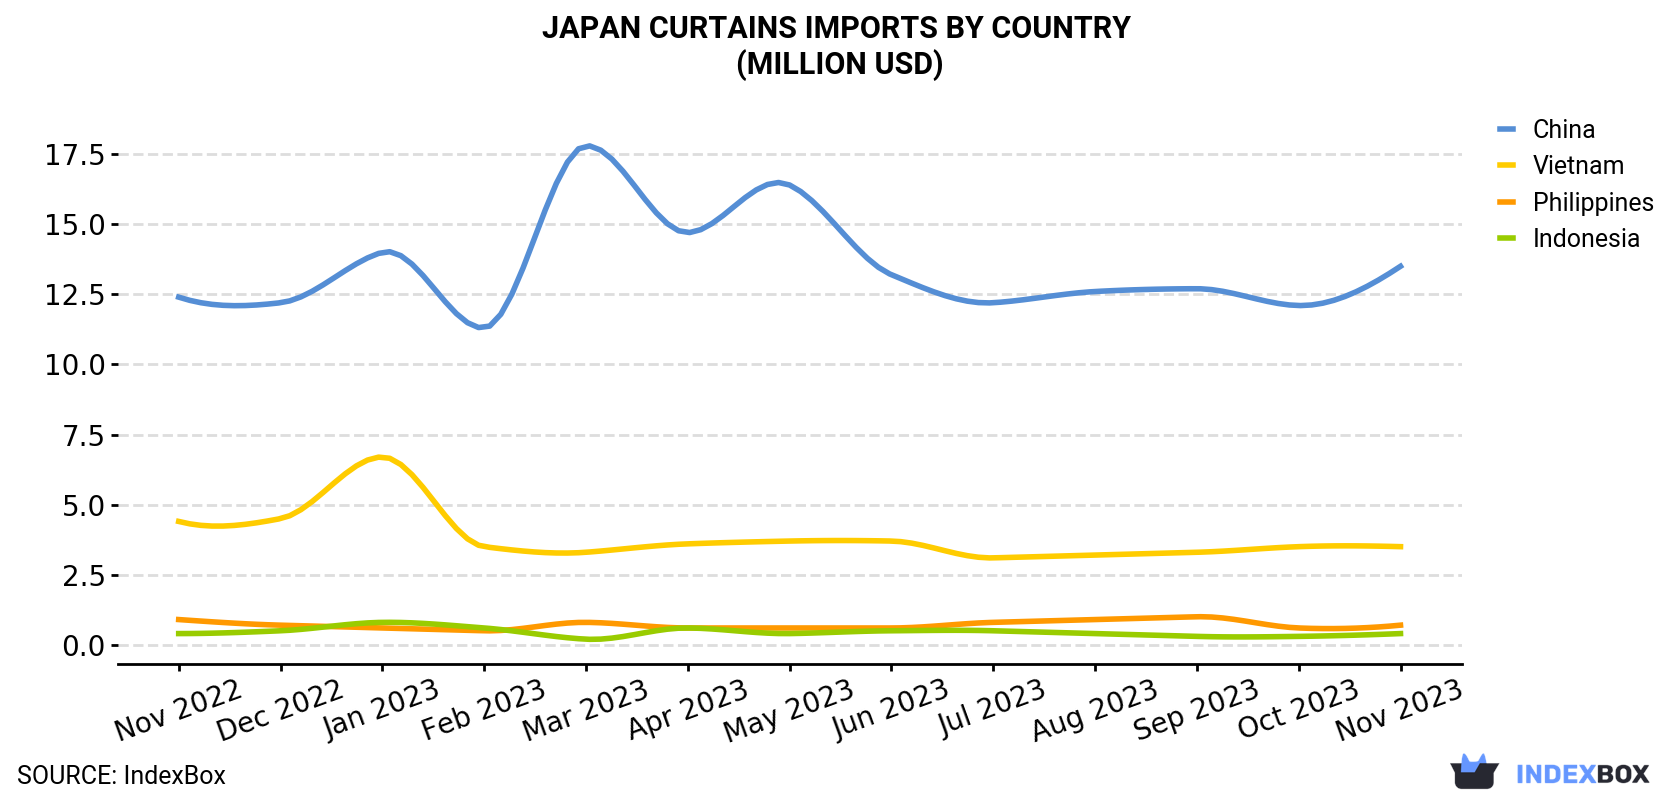 Japan Curtains Imports By Country (Million USD)